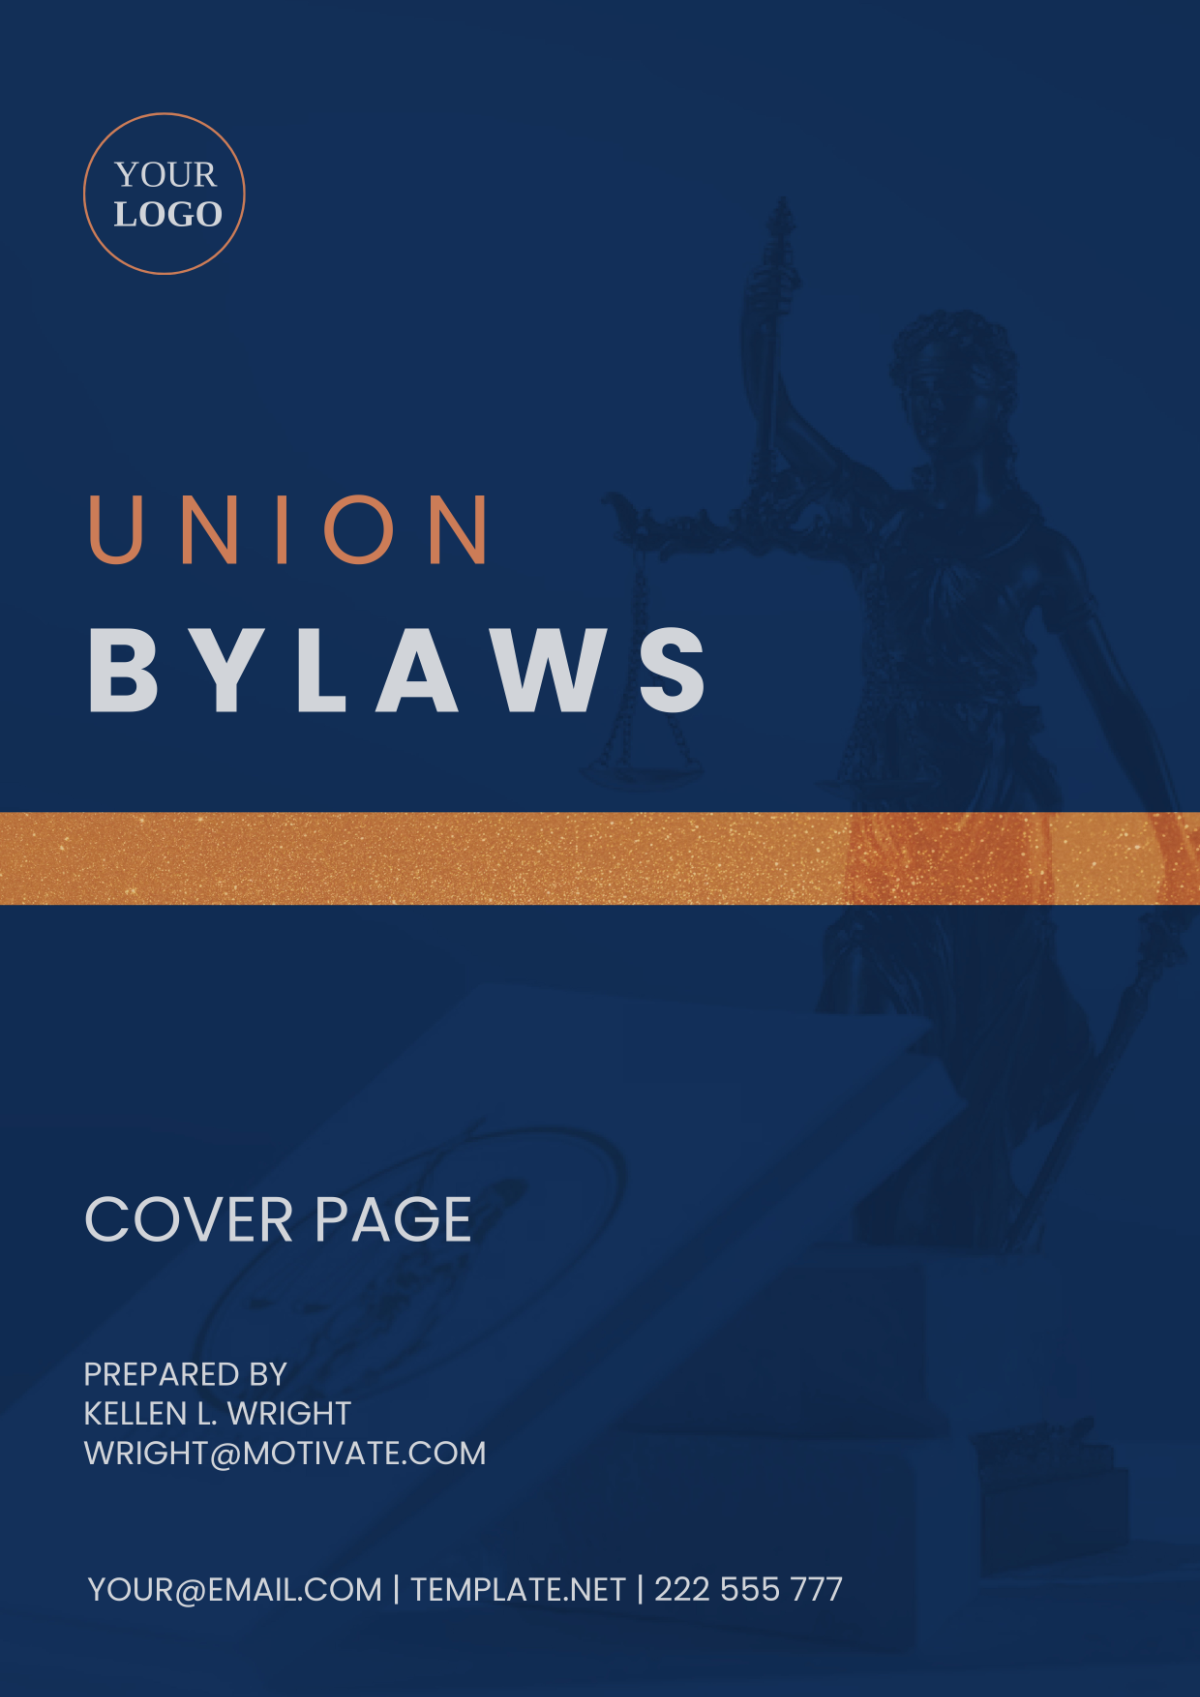 Union Bylaws Cover Page